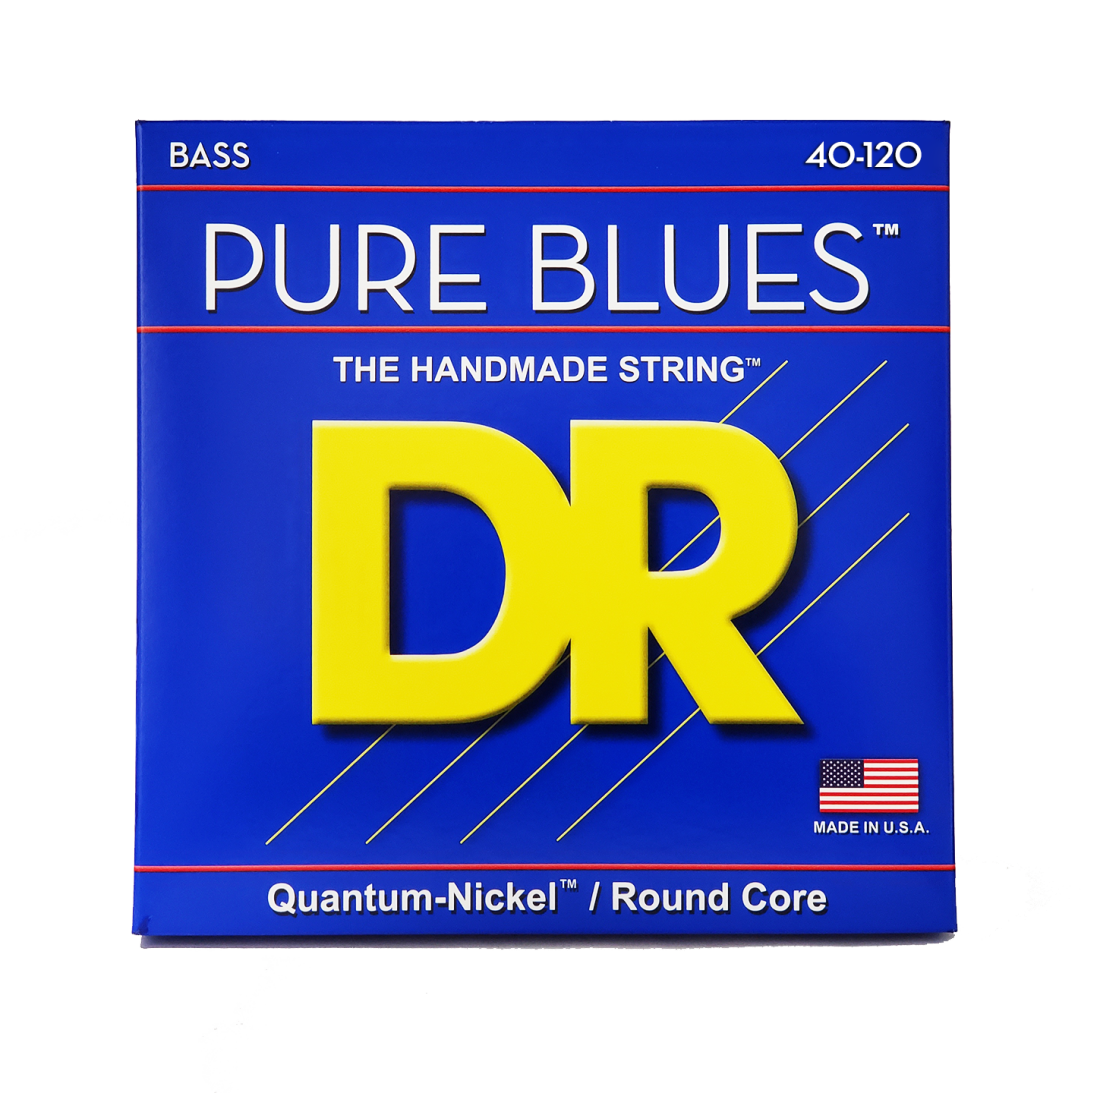 Pure Blues Electric Bass Strings (5-String Set) - Light 40-120